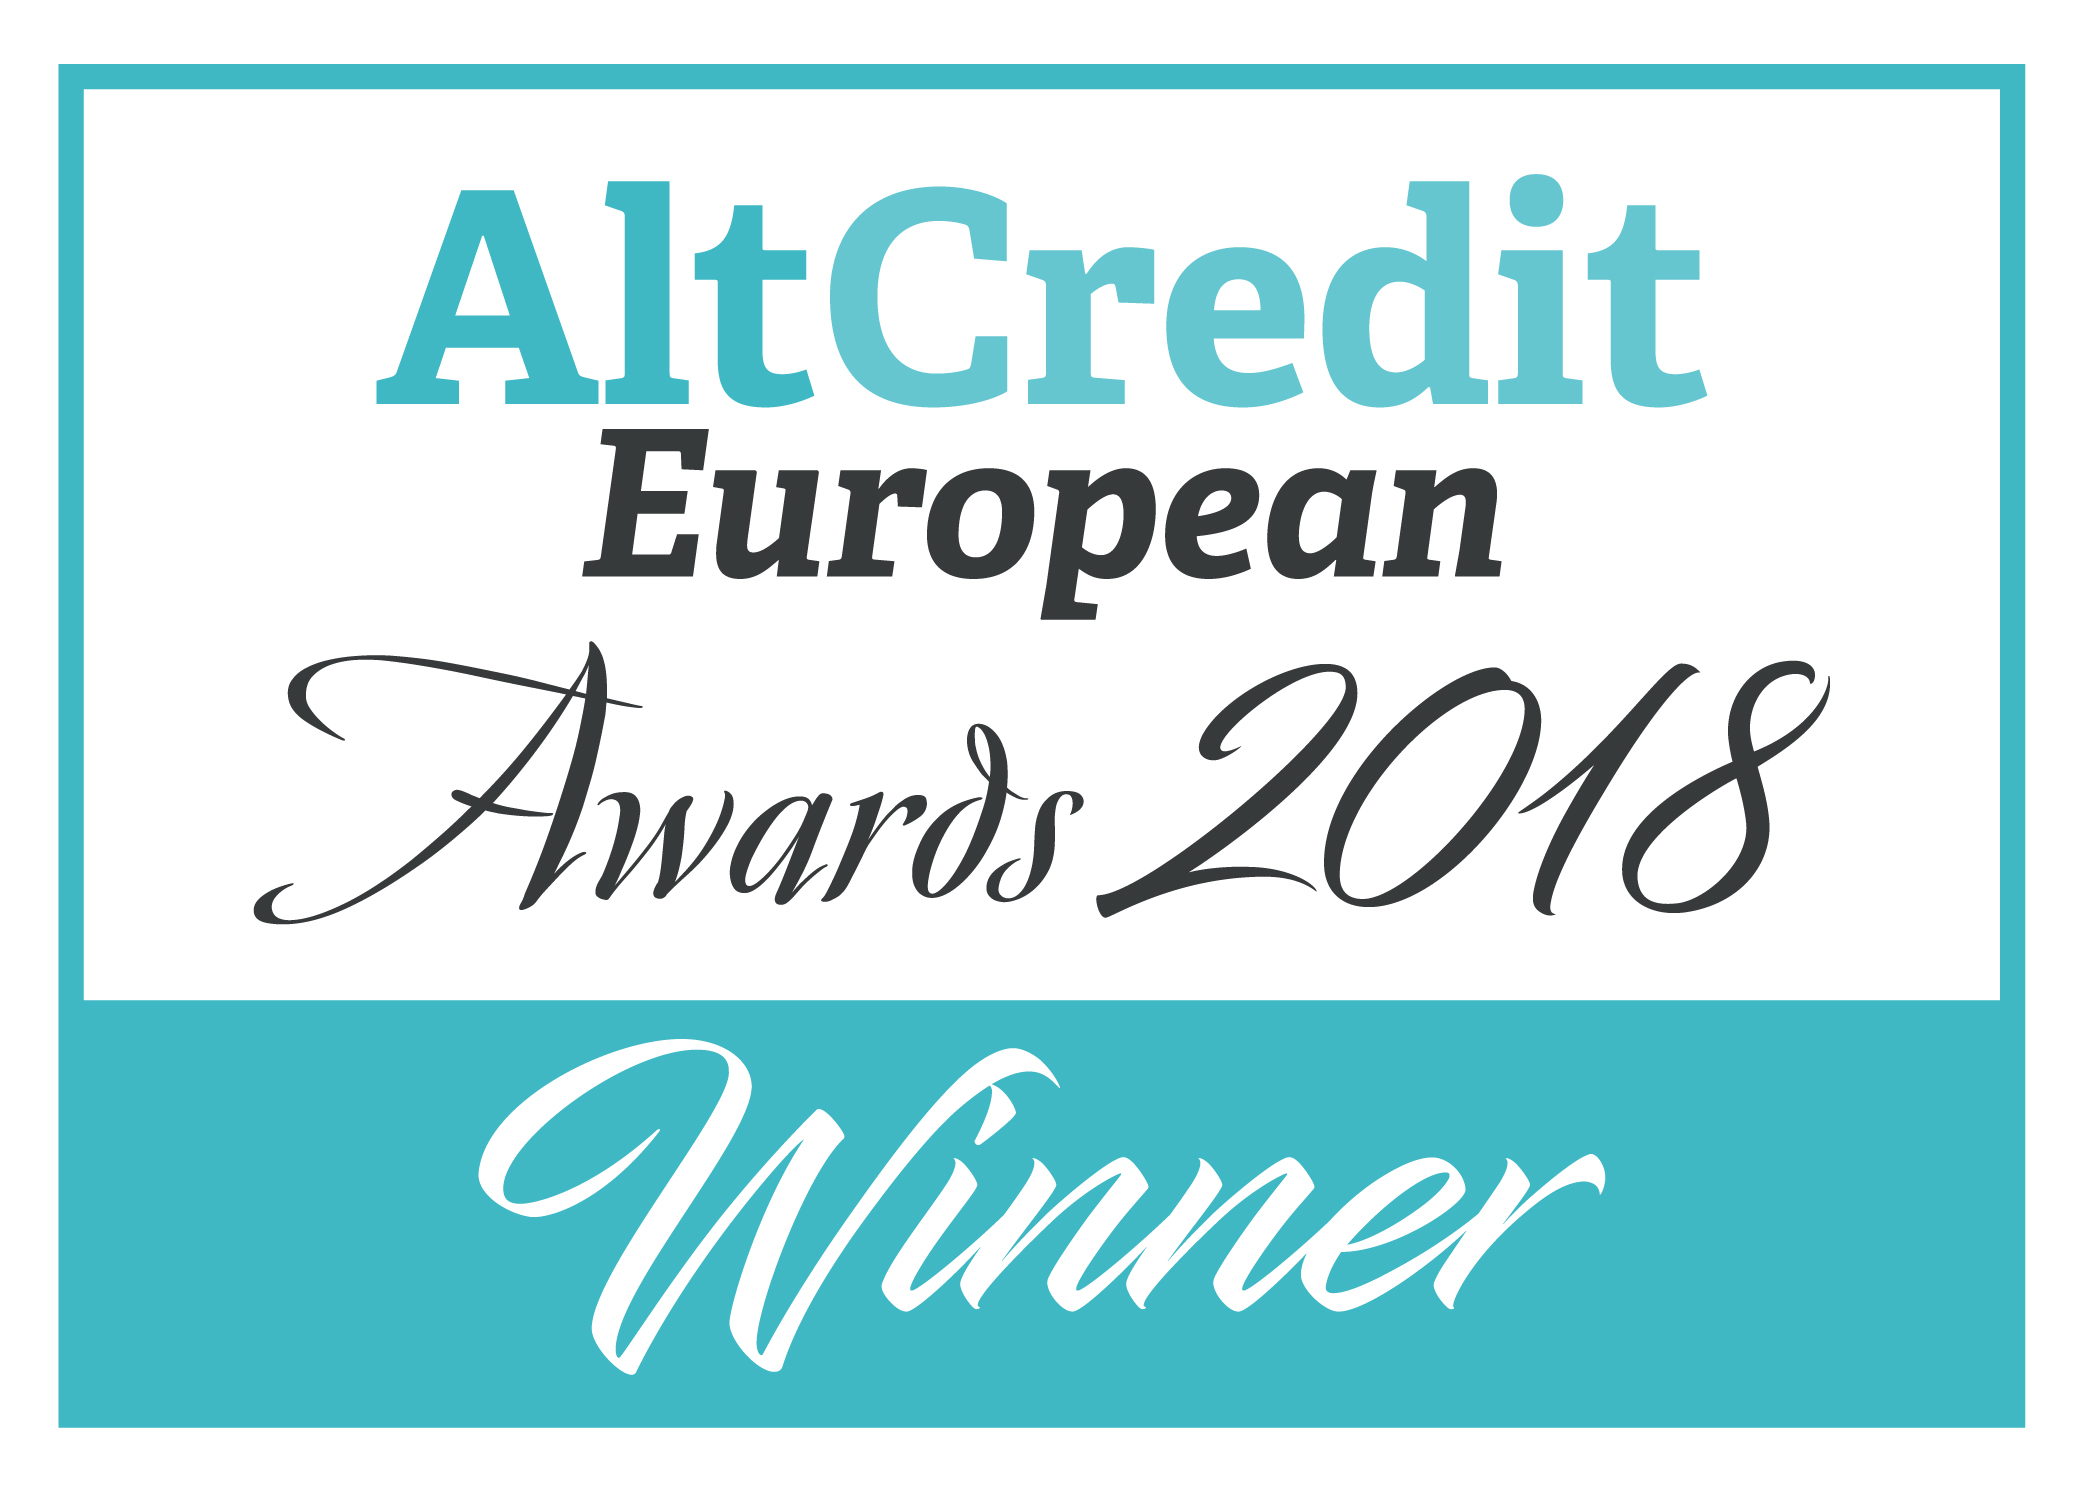 Apera named Alt Credit Intelligence Credit Newcomer of the Year